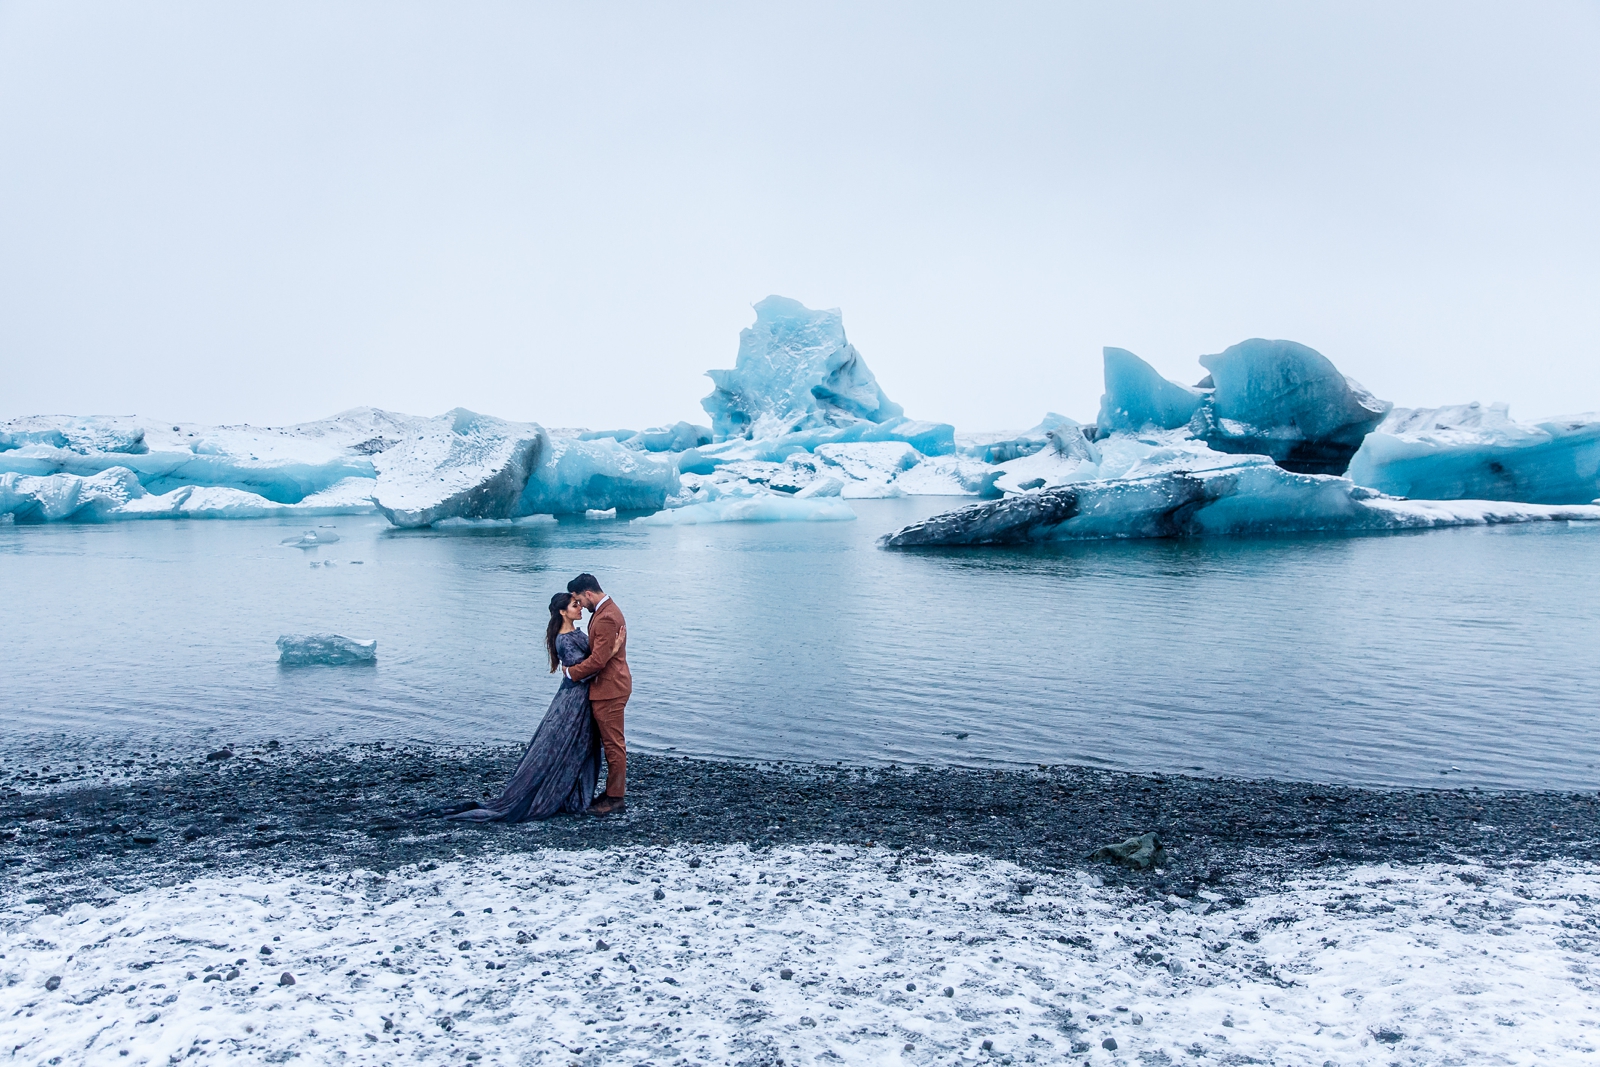 Rain and snow didn't stop this couple from eloping at the glacier lagoon in Southern Iceland.